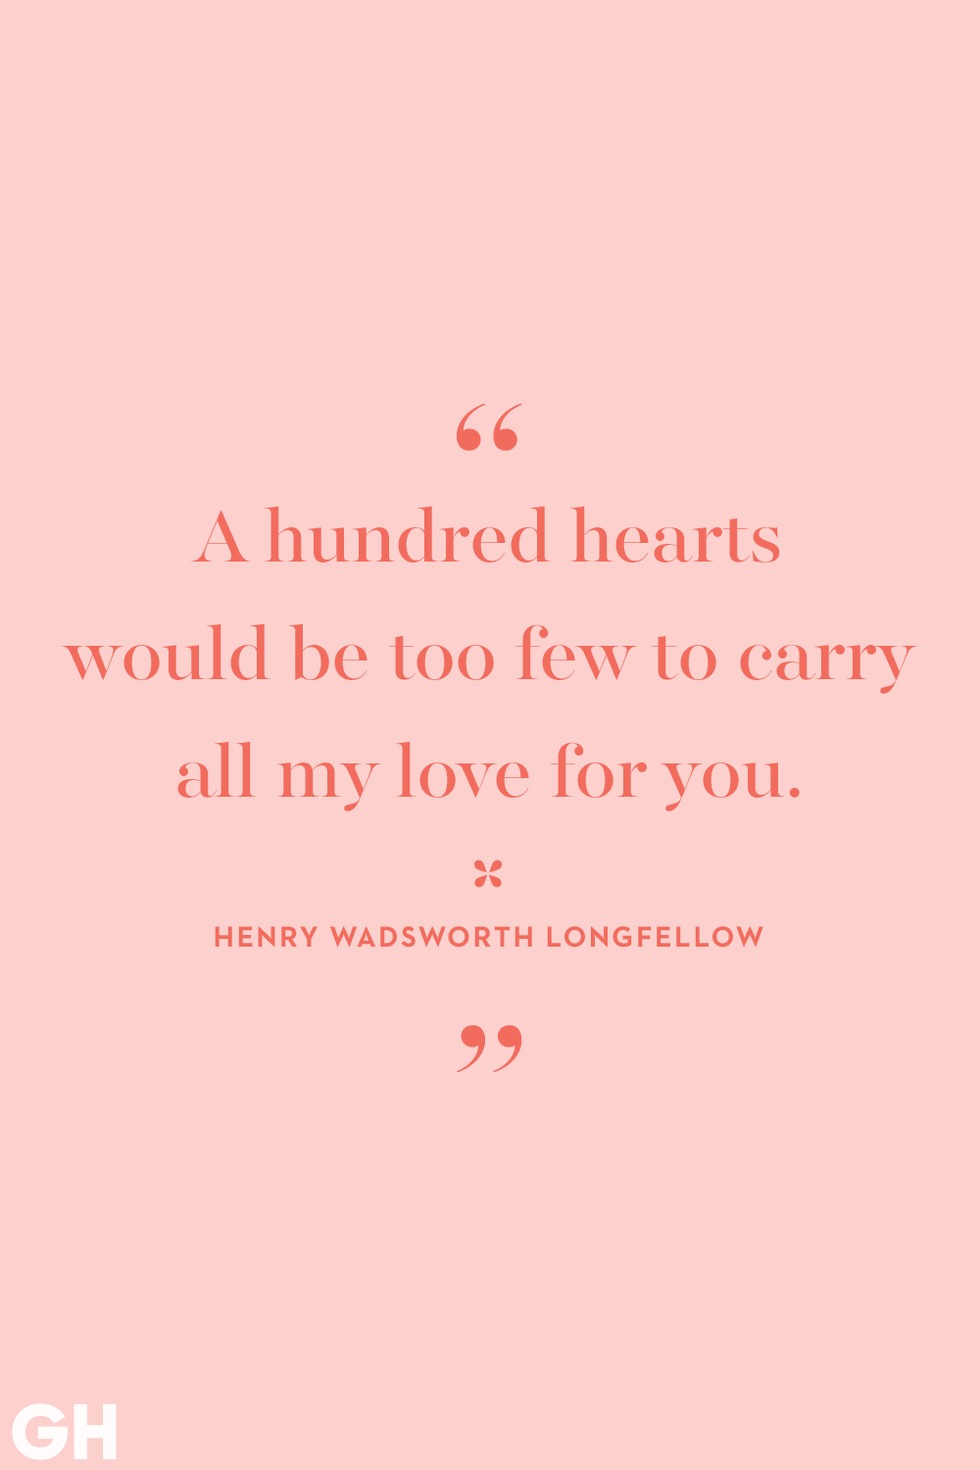 90 Best Love Quotes for Her - Romantic Quotes for Wife or GF